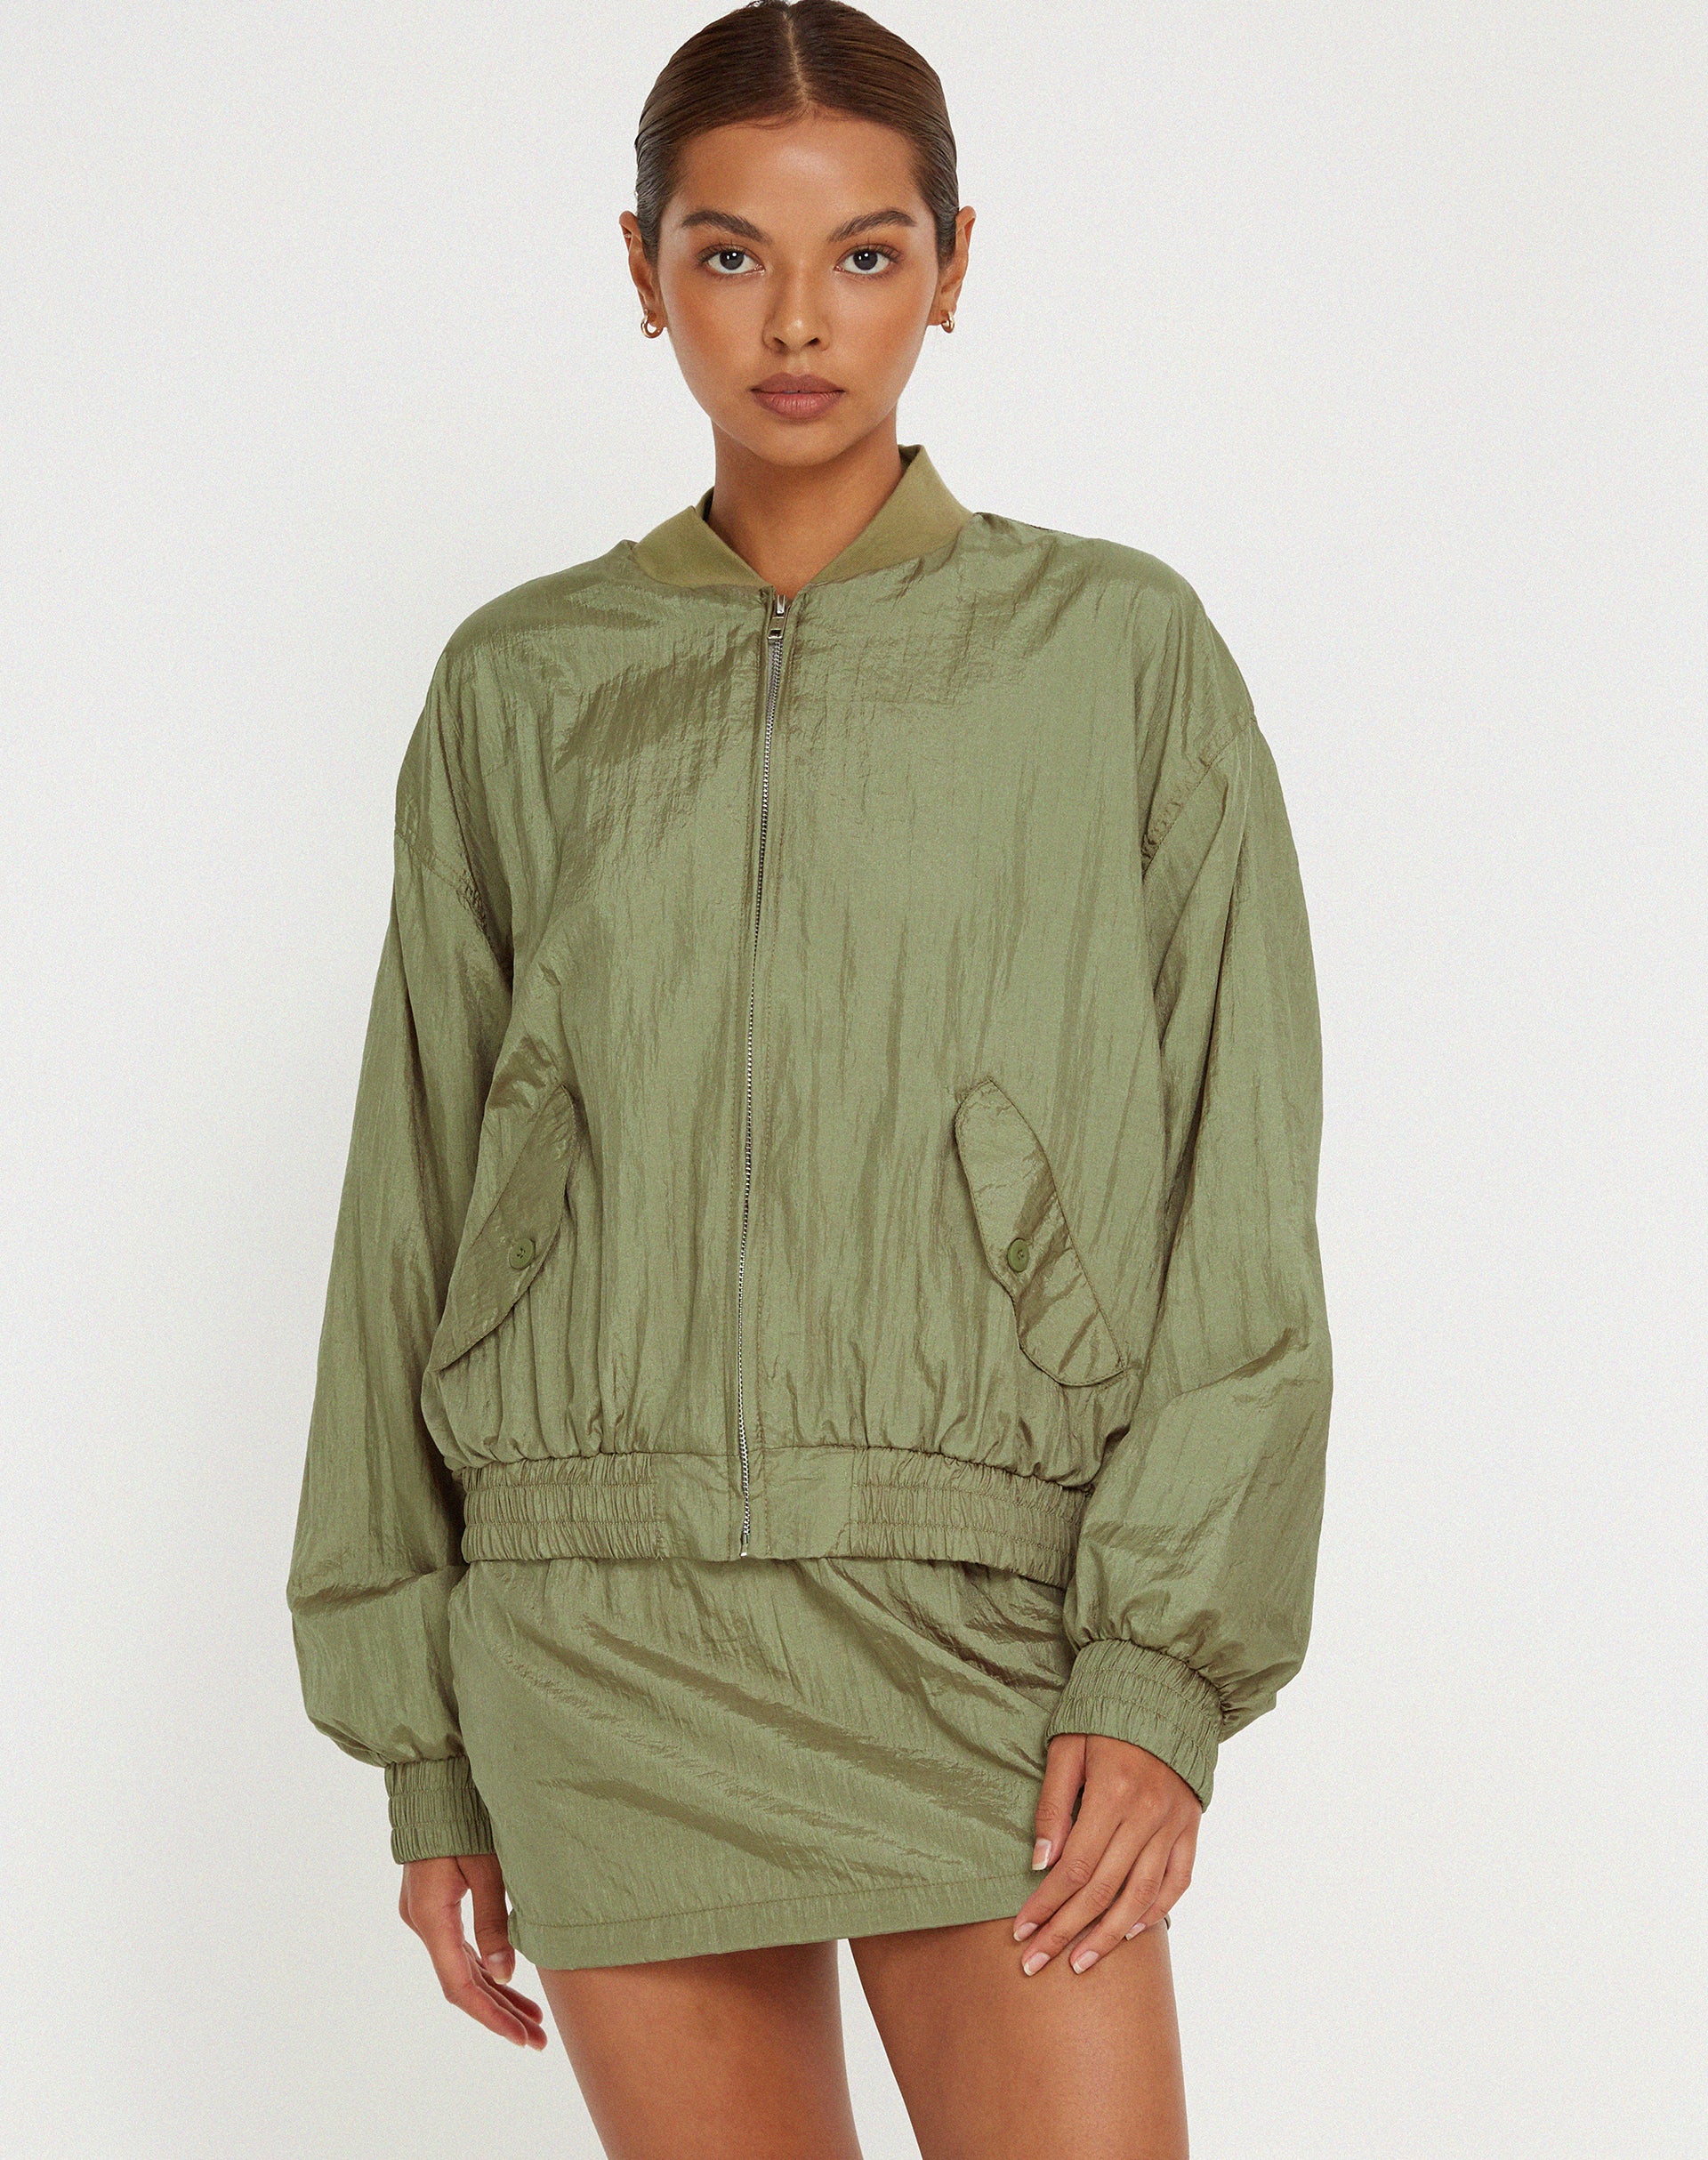 image of Yuu Shell Jacket in Silver Green